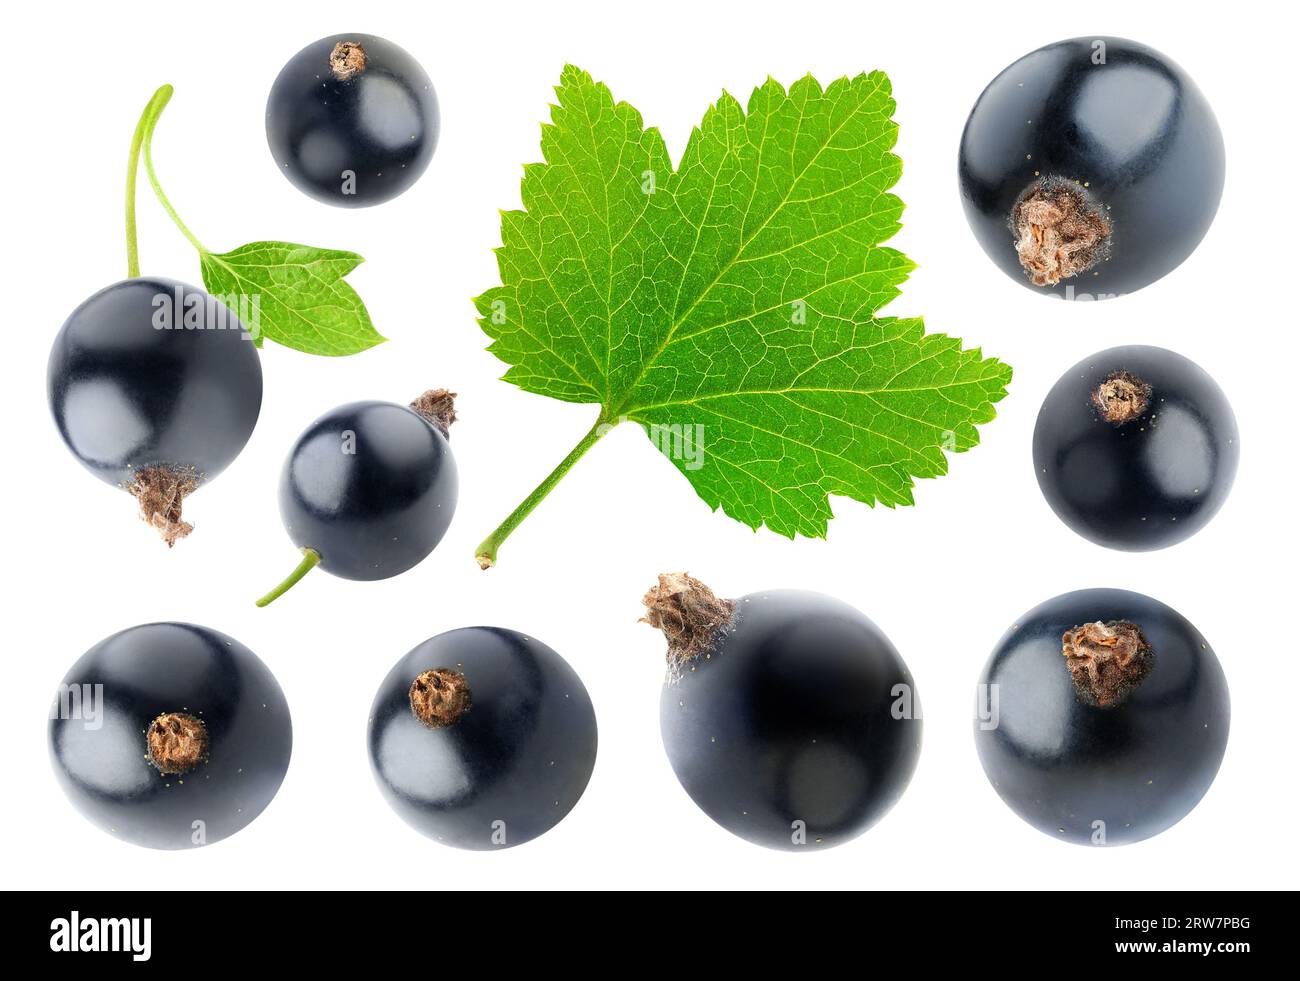 Collection of black currant berries and a leaf, isolated on white background Stock Photo